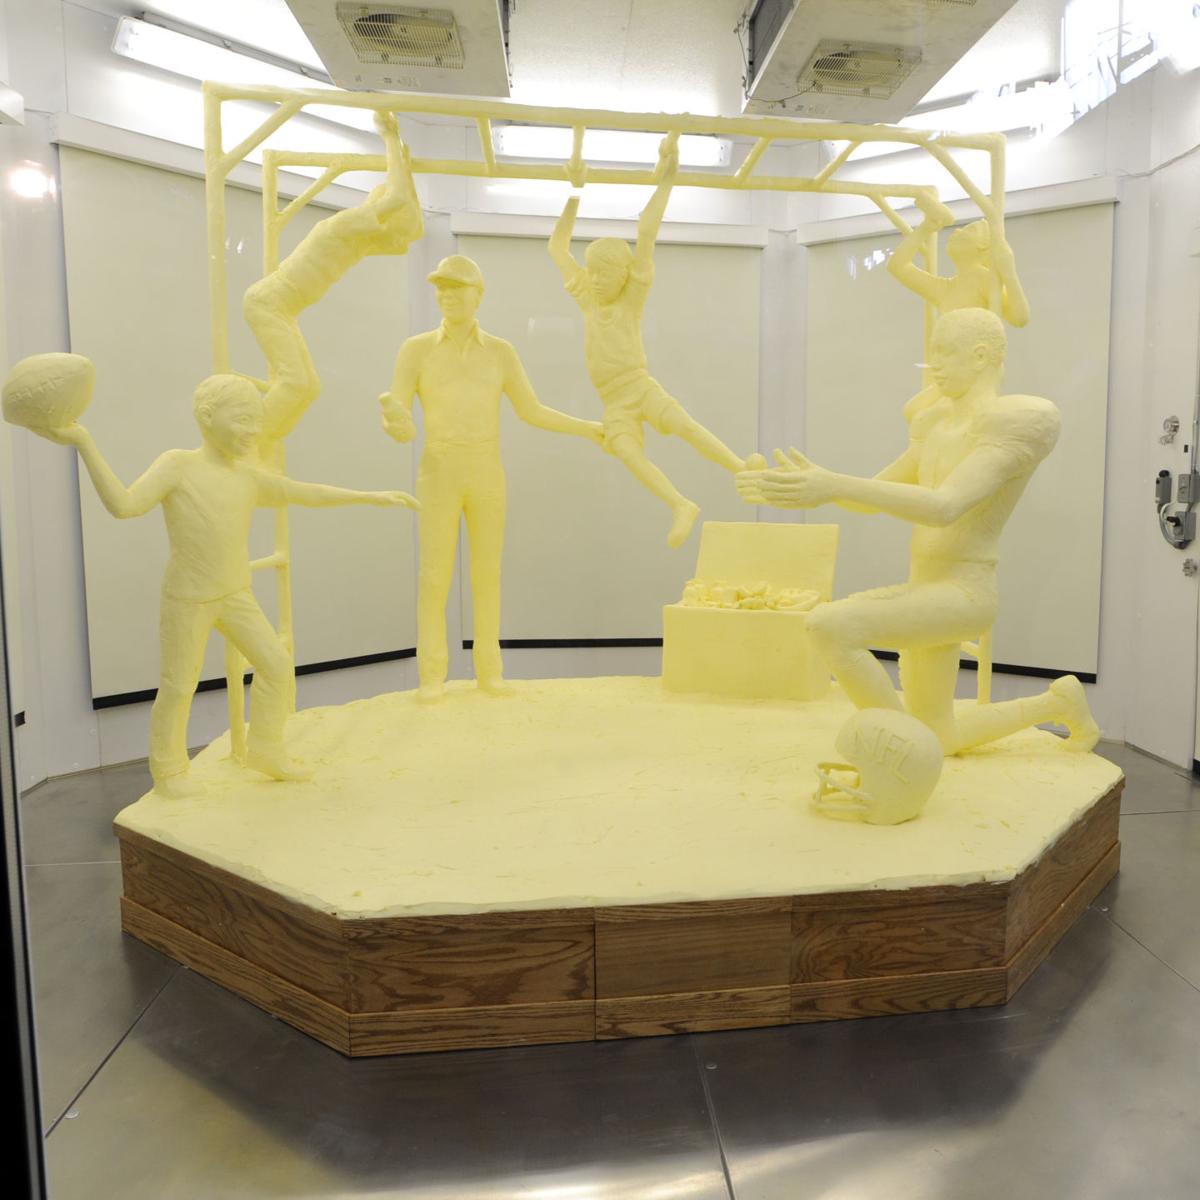 Photos Looking back at past state fair butter sculptures Food and